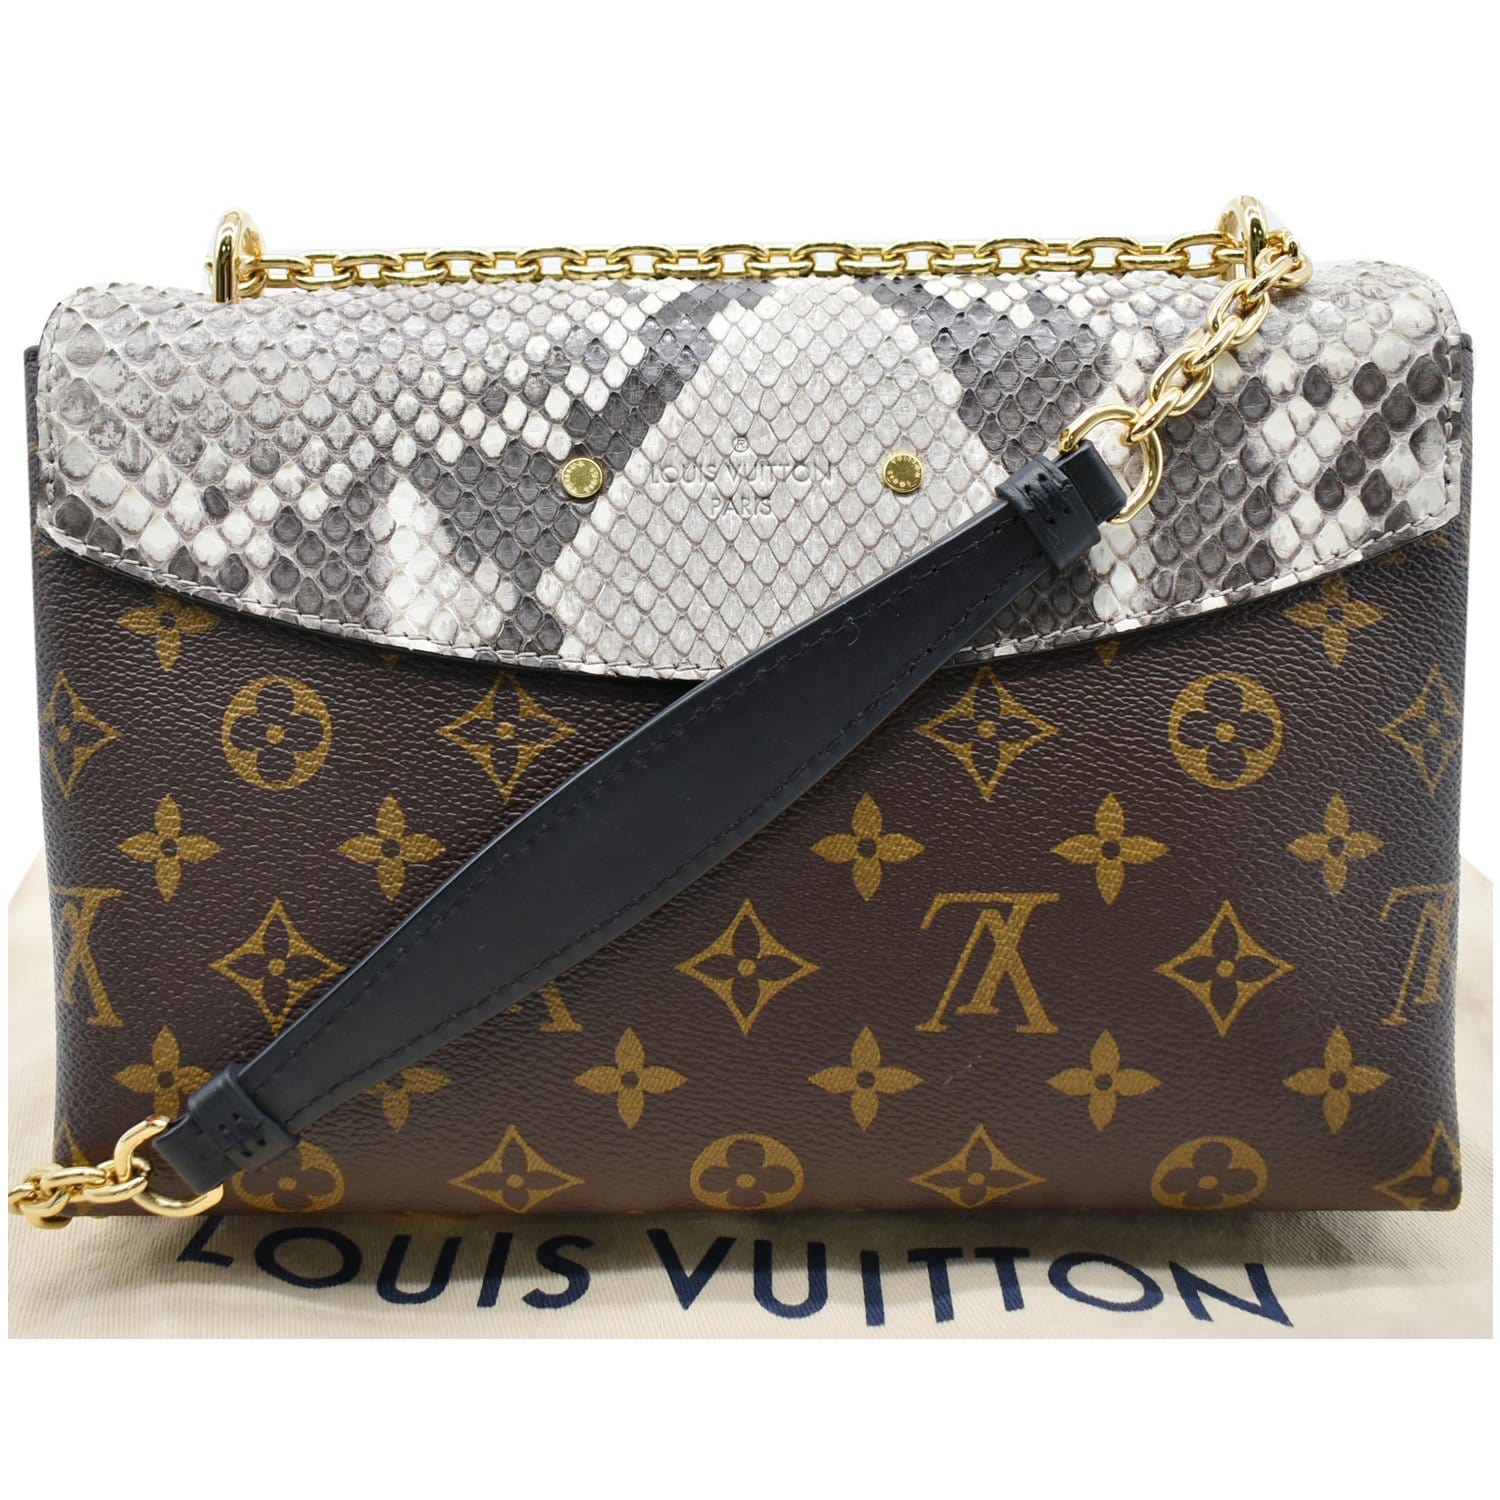 Worth flying for Louis Vuitton launches new Saint Placide bag